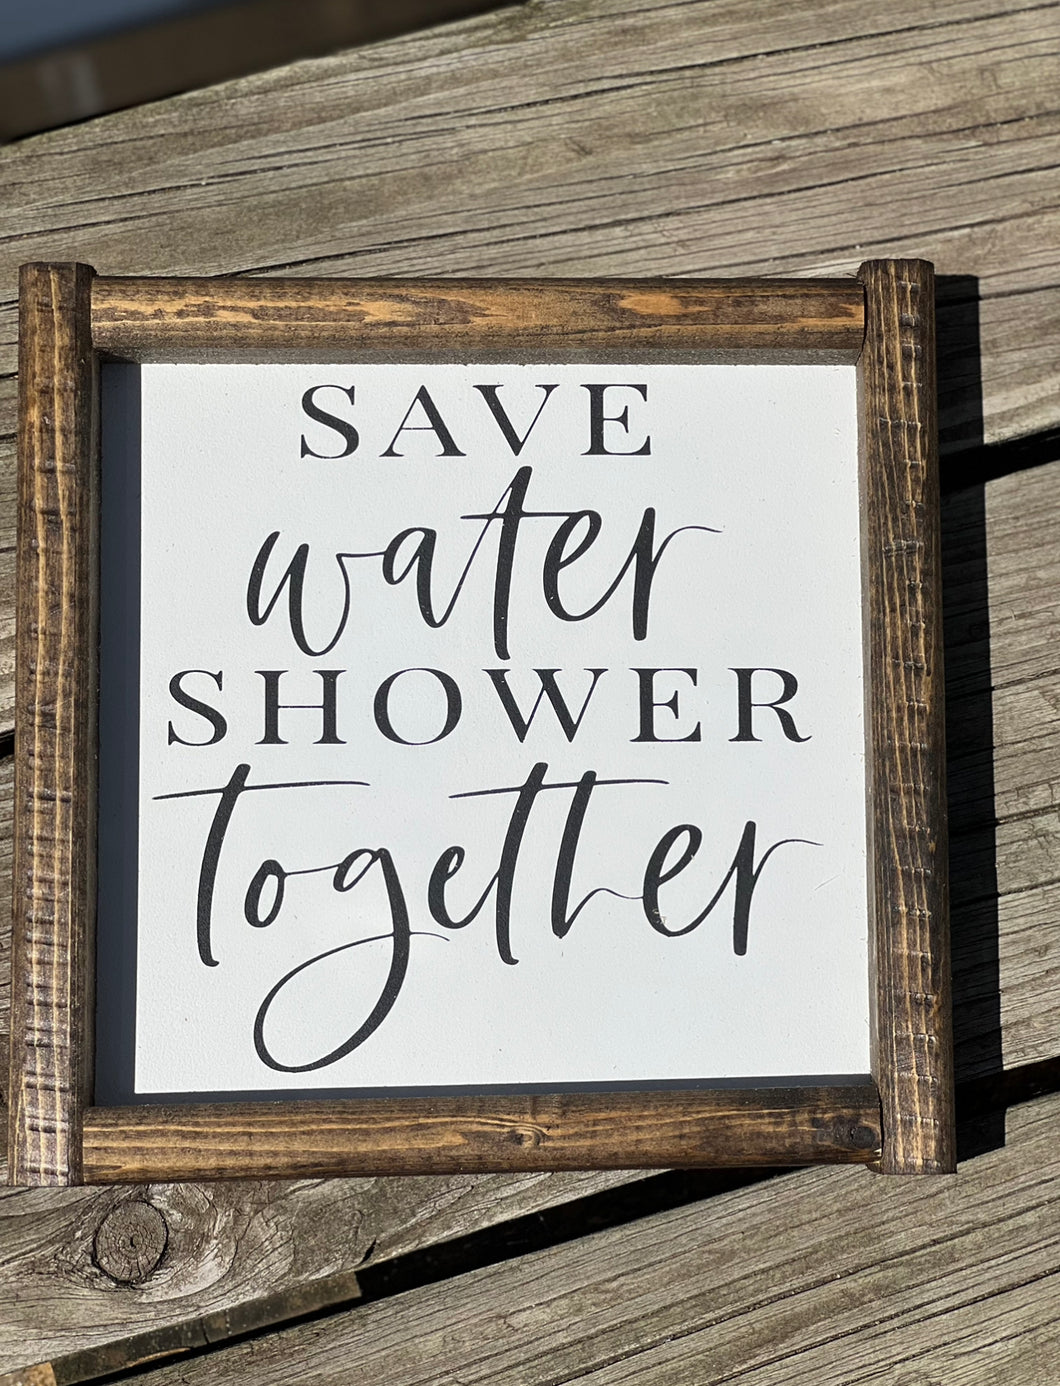 Save water Shower together